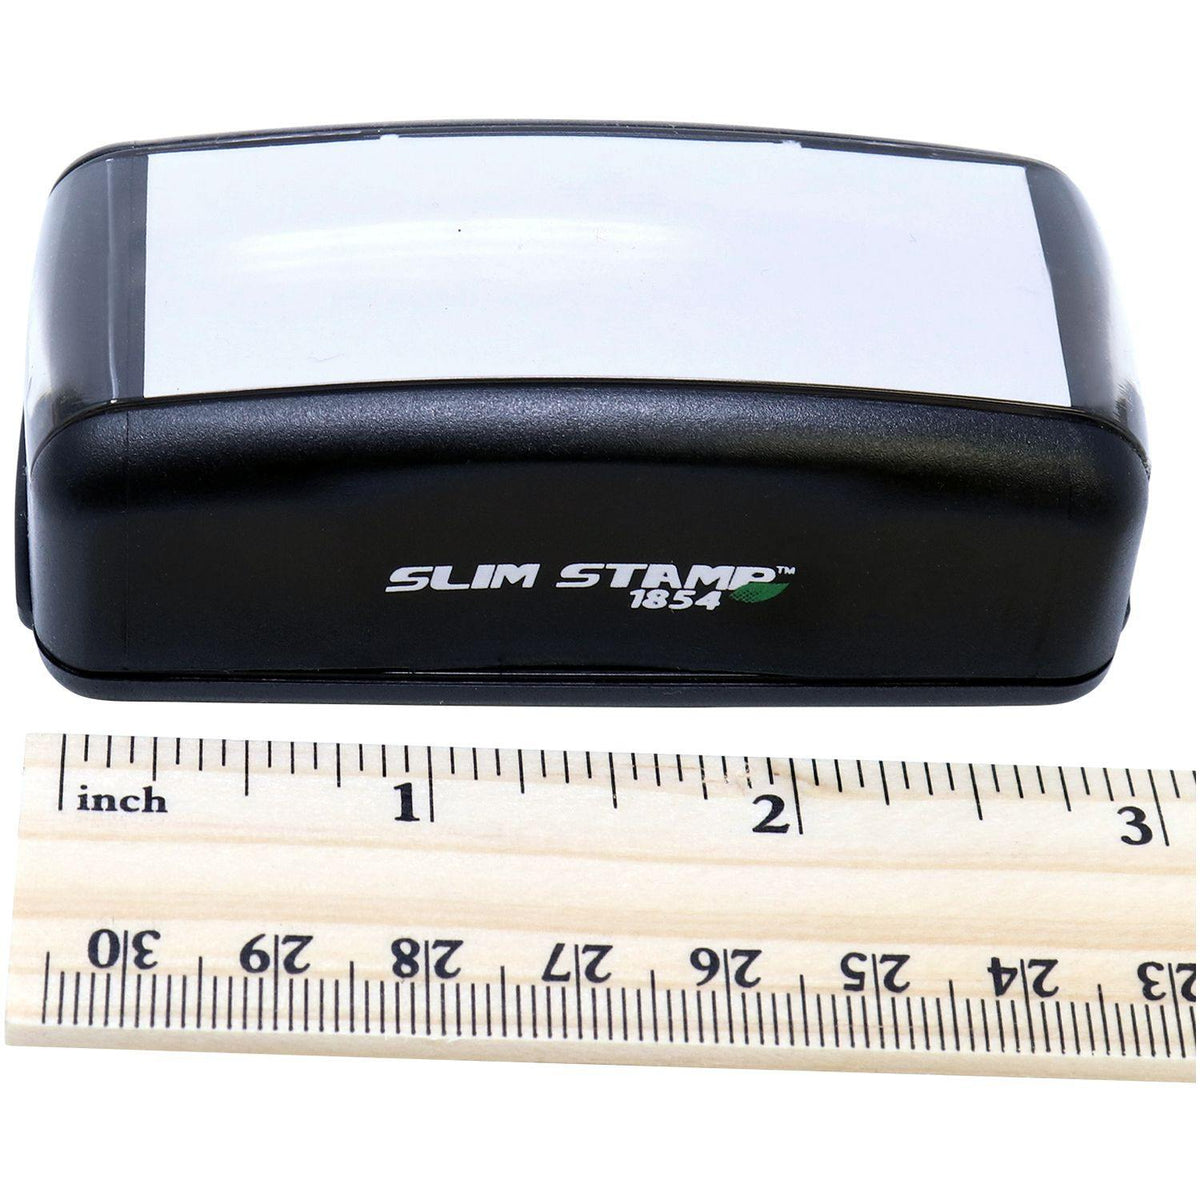 Measurement Large Pre-Inked Shelter in Place Stamp with Ruler